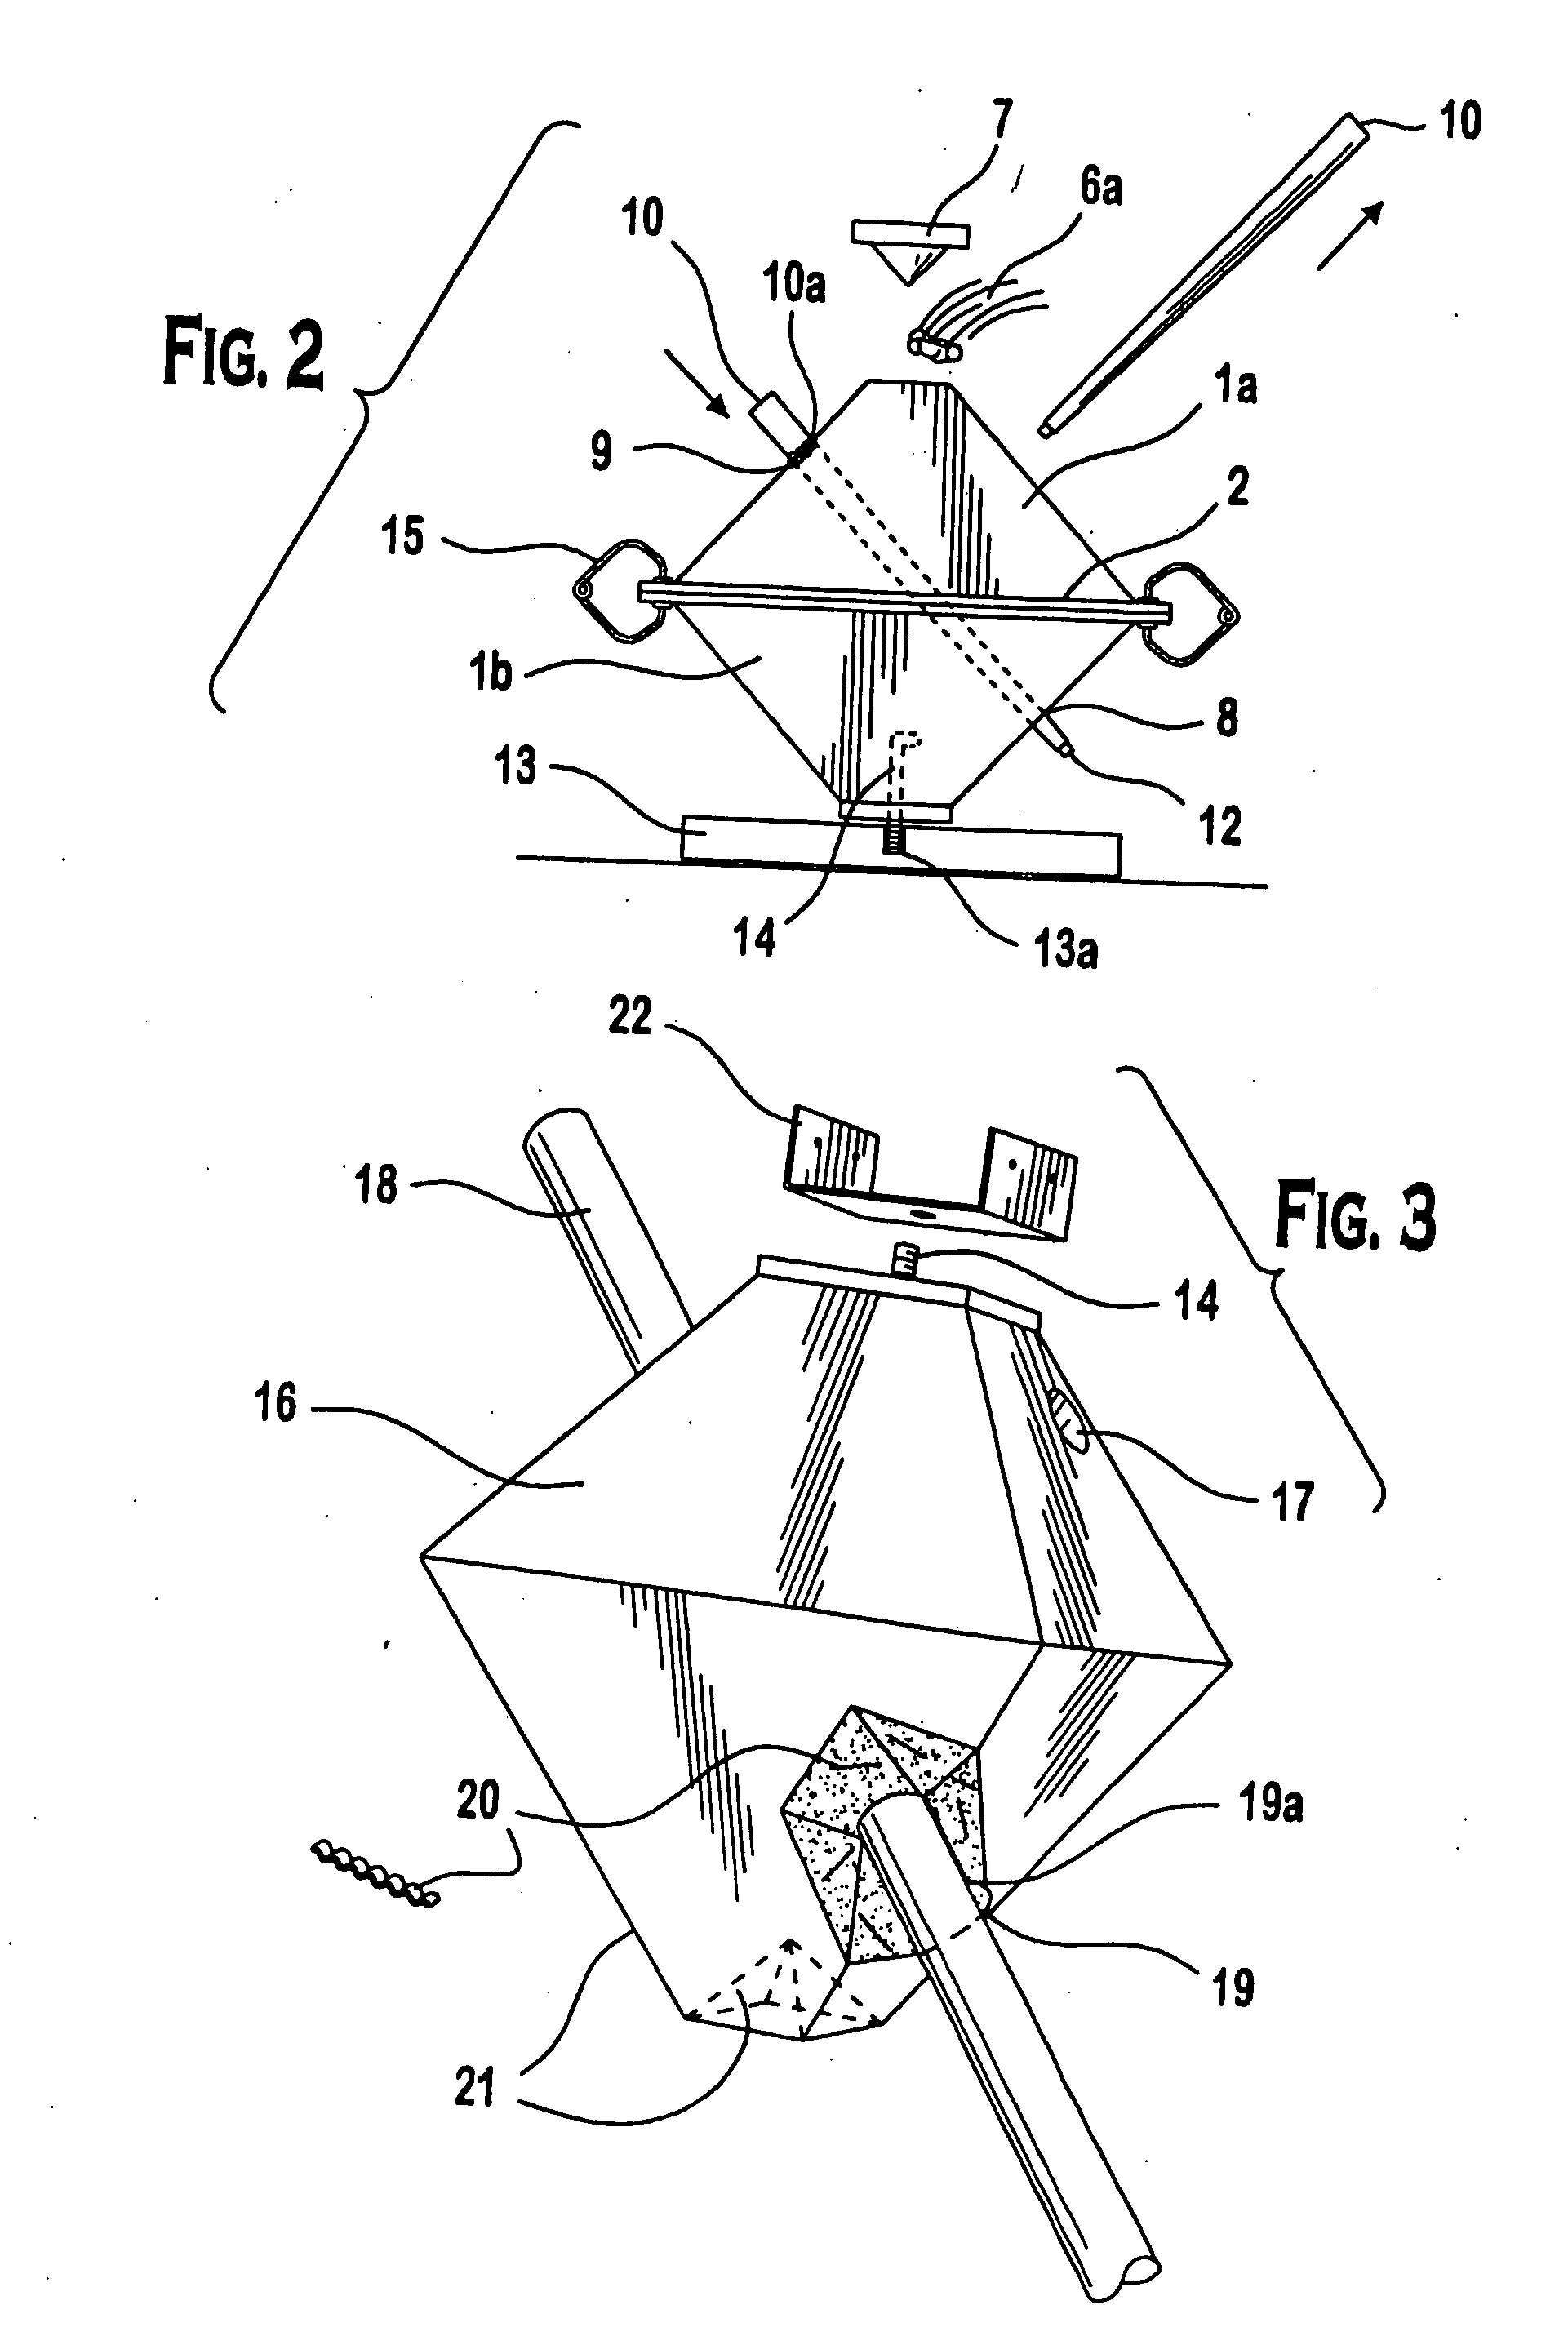 Novel surface structures and methods thereof